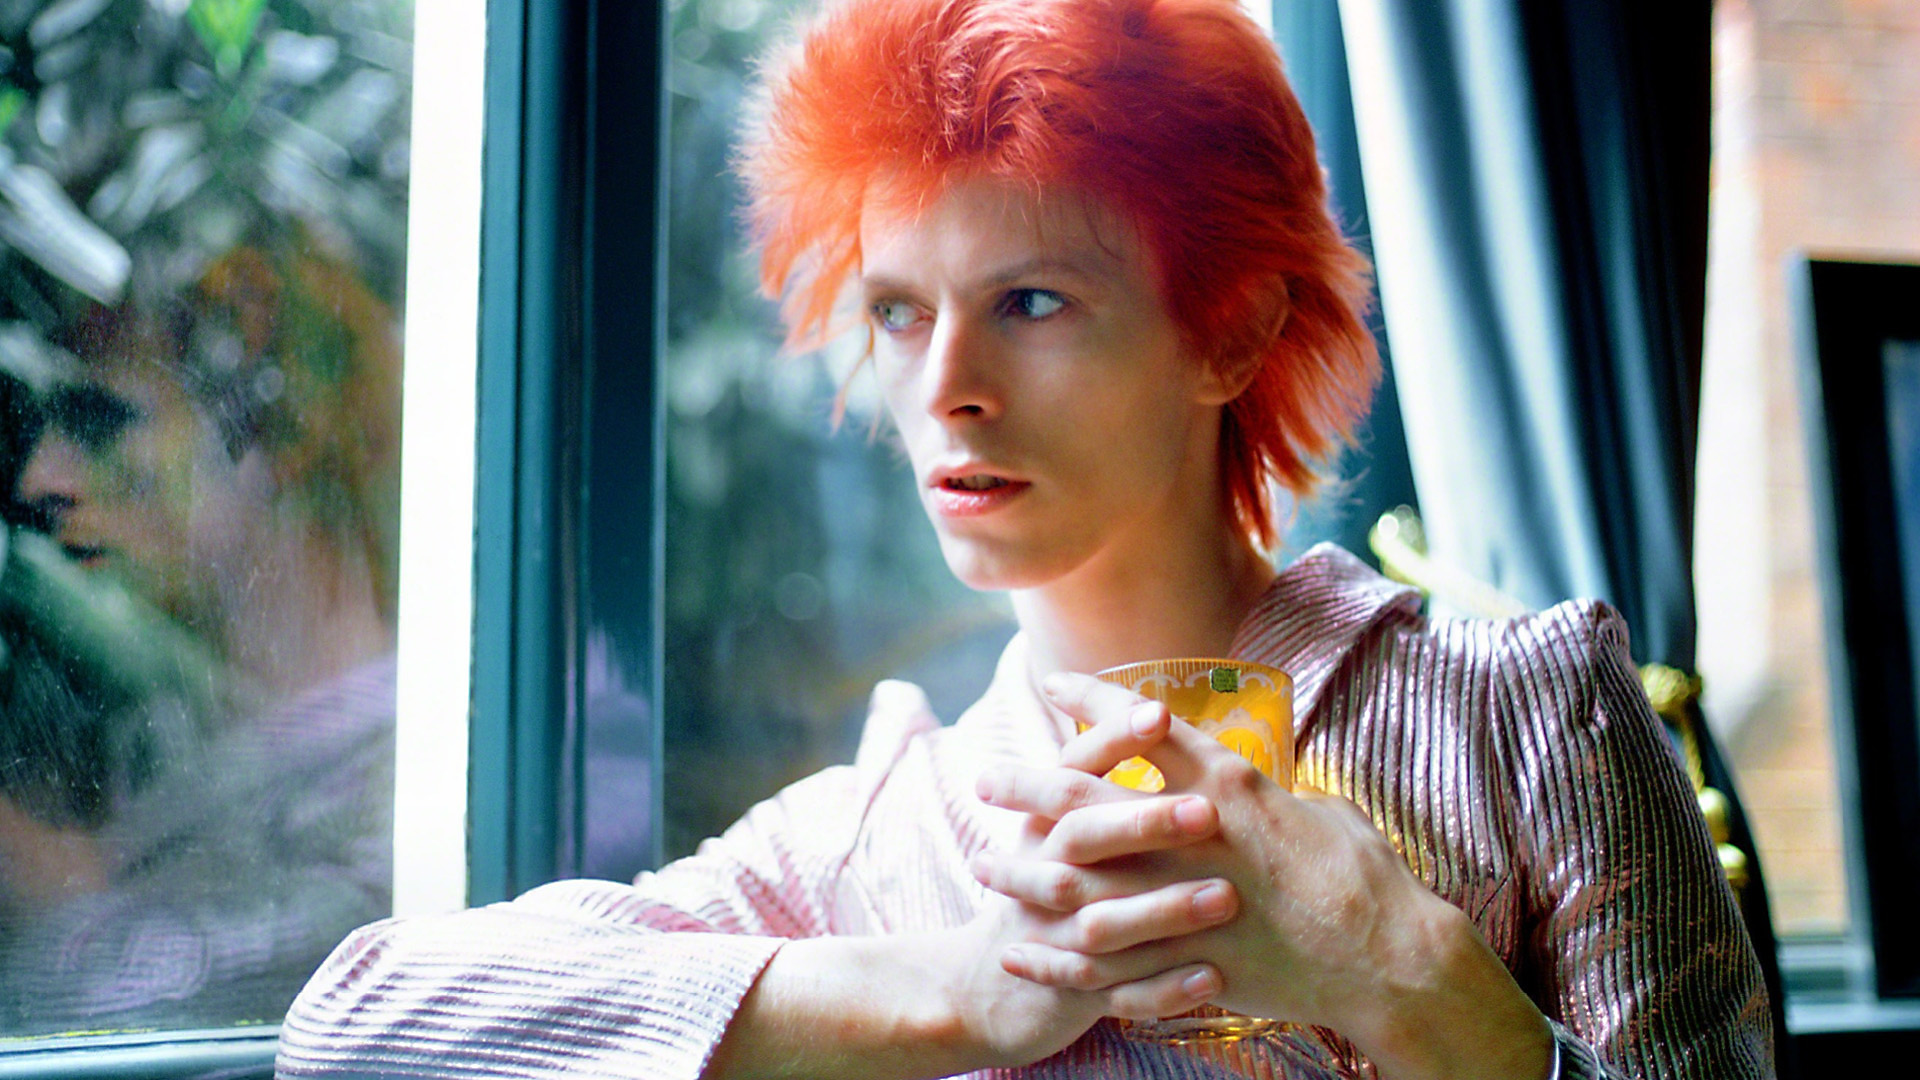 Music David Bowie HD Wallpaper | Background Image